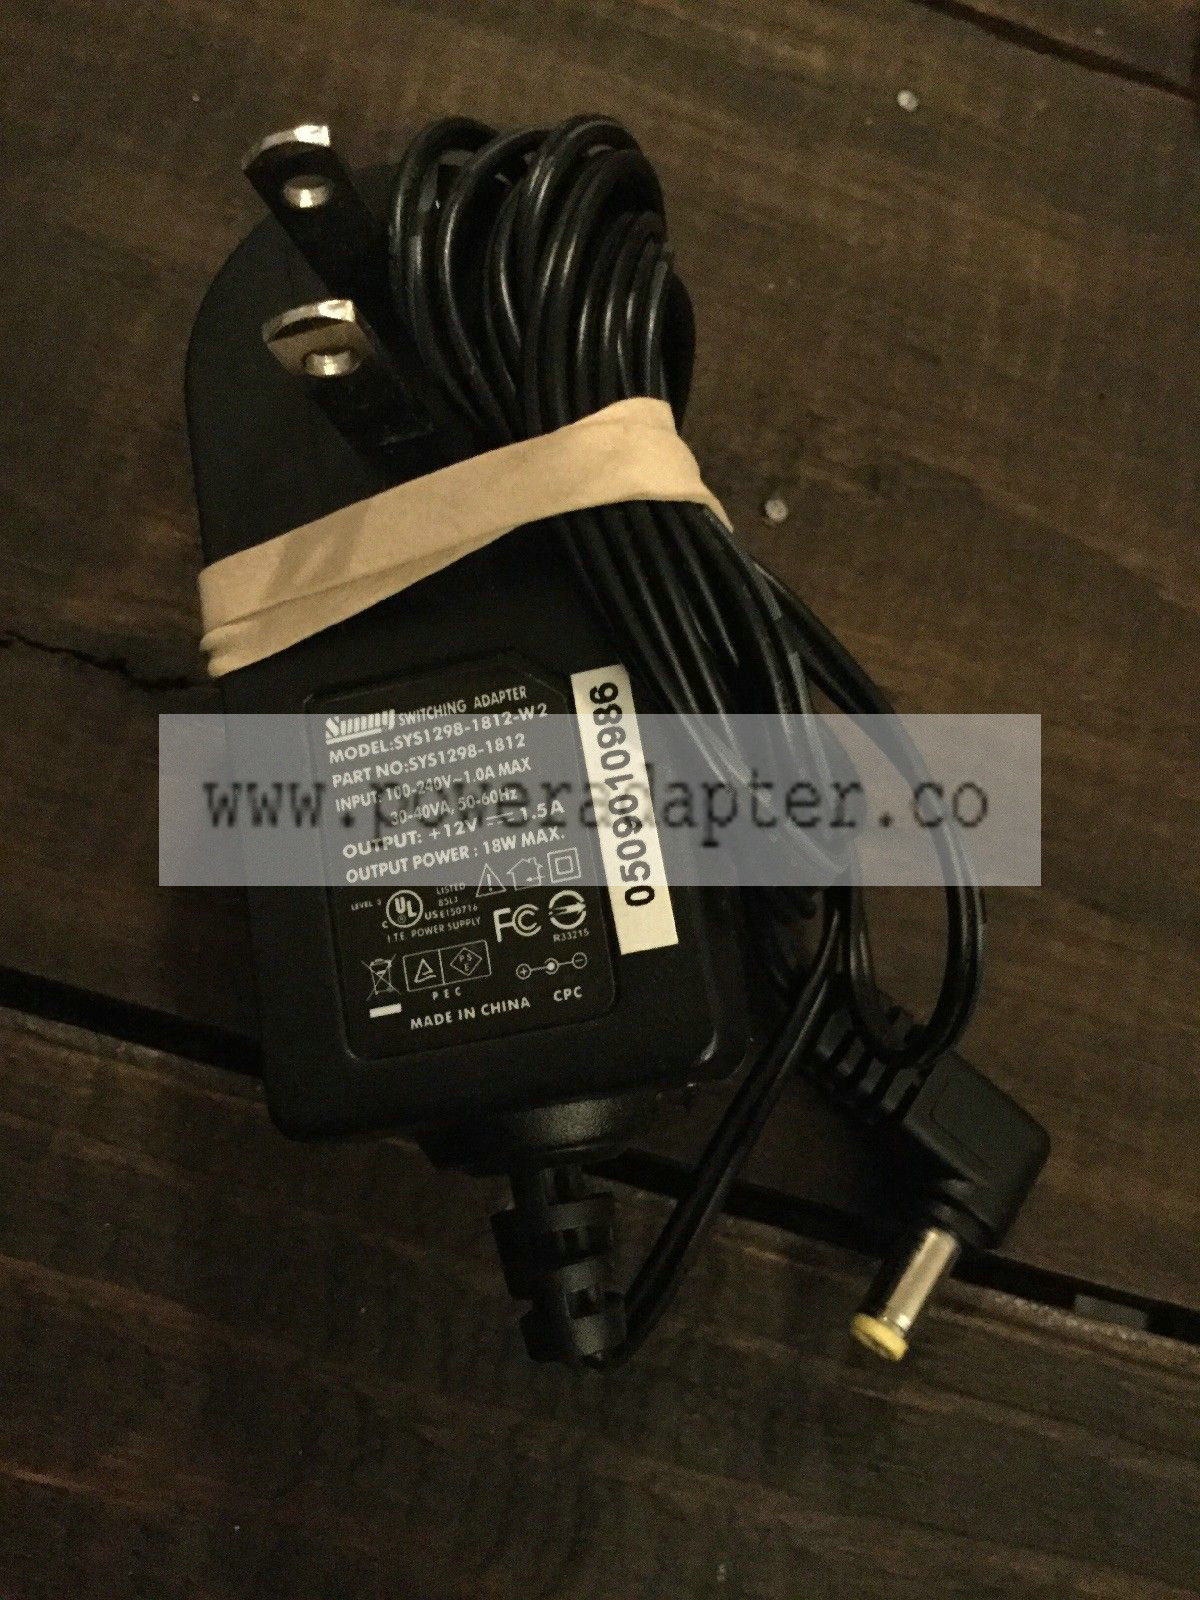 Switching Adapter Model SYS1298-1812-W2 Power Supply 12V 1.5A SUNNY EUC Brand: CPC MPN: SYS1298-1212 Model: SYS1298